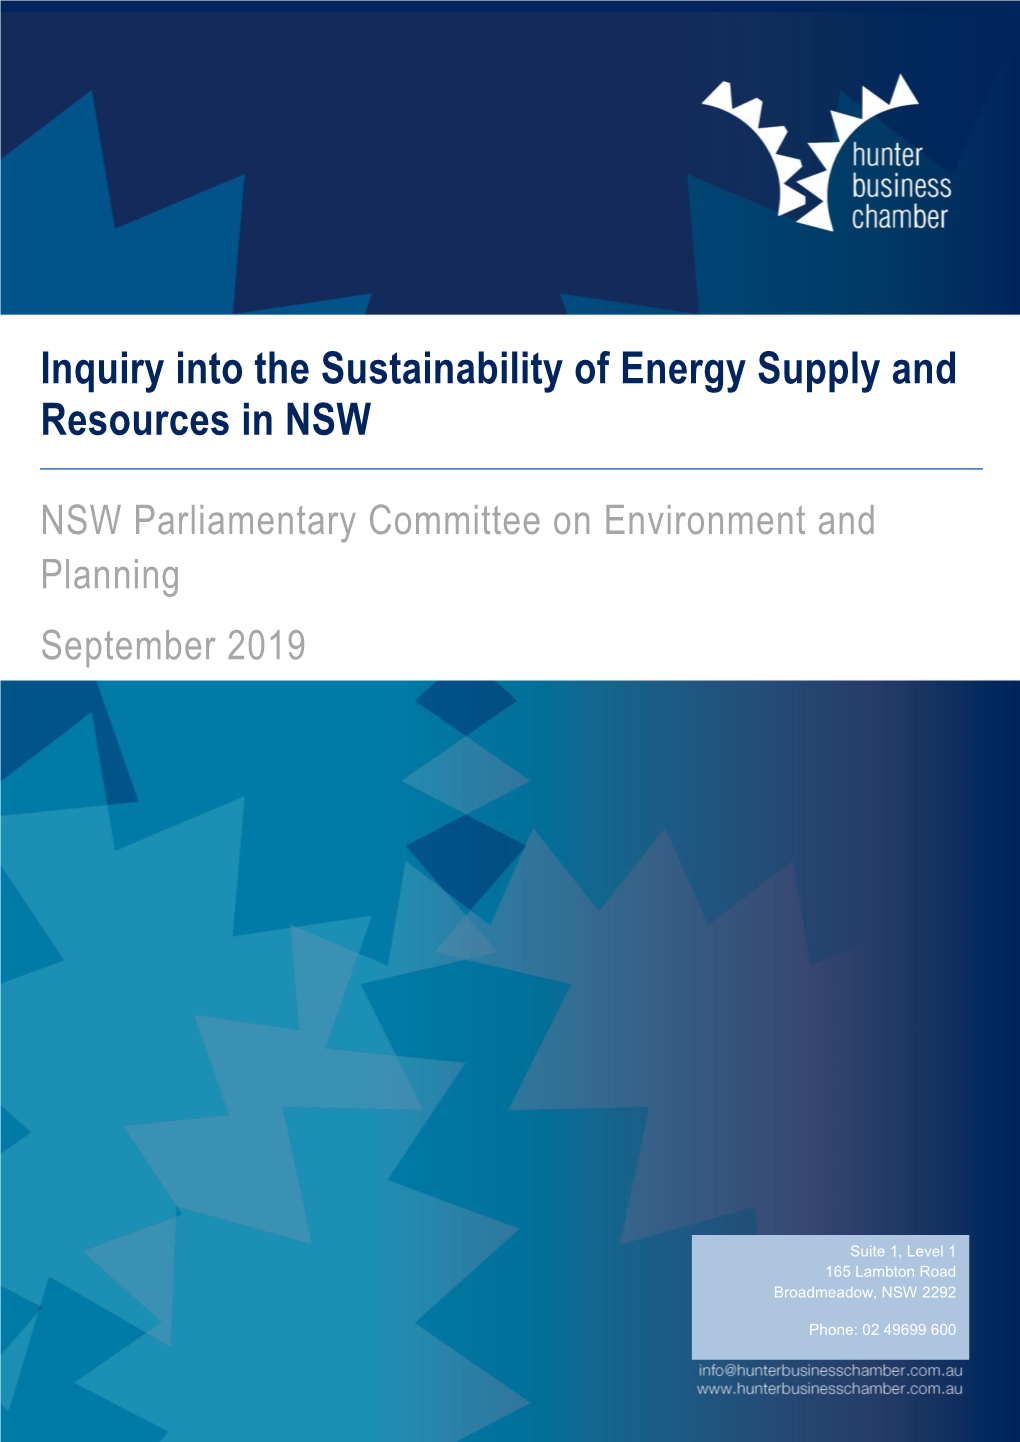 Inquiry Into the Sustainability of Energy Supply and Resources in NSW